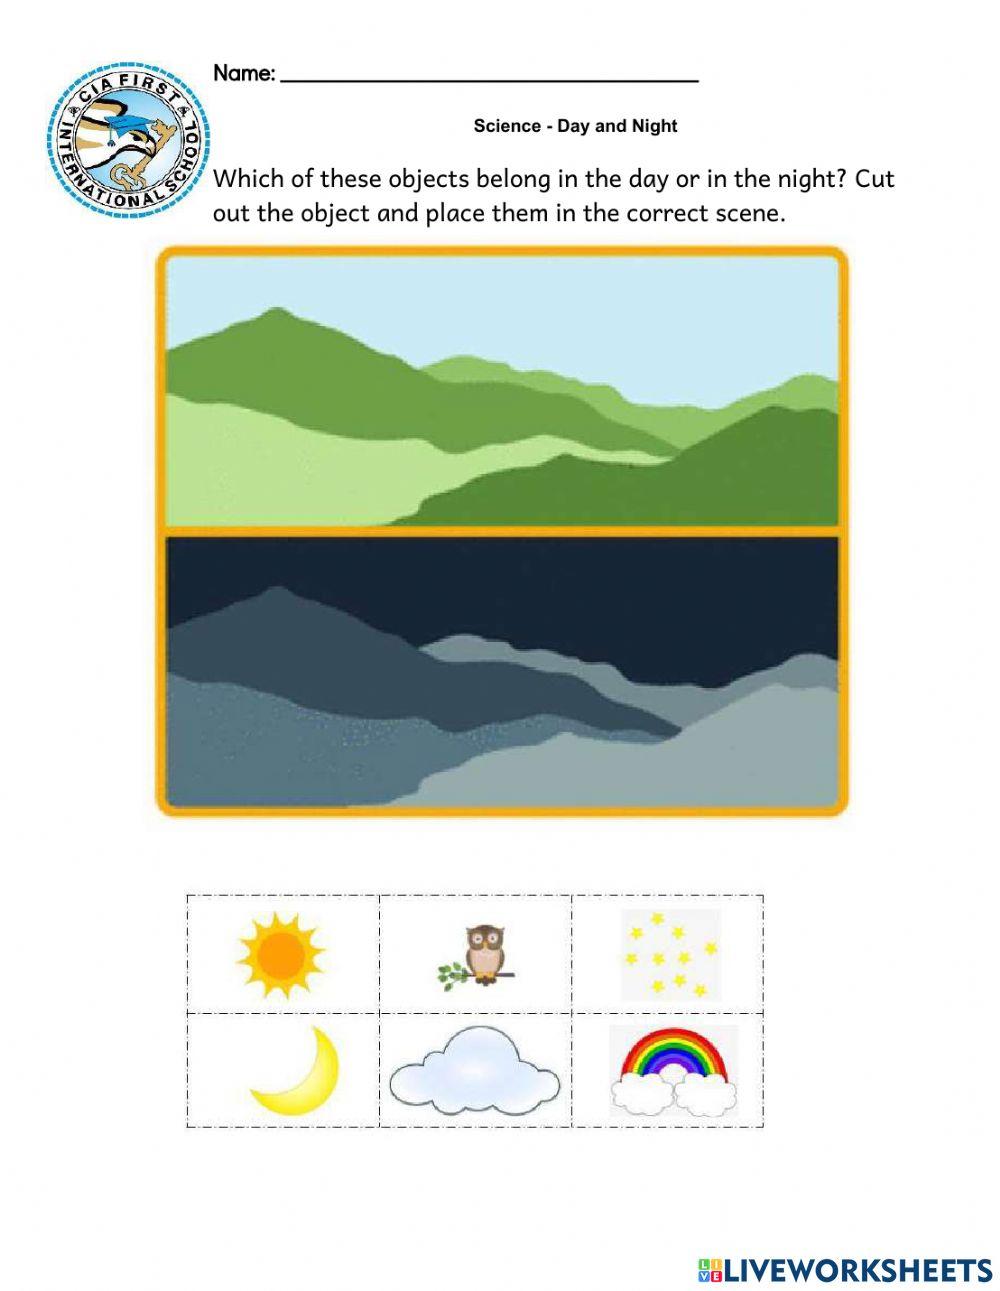 Science: Day and Night